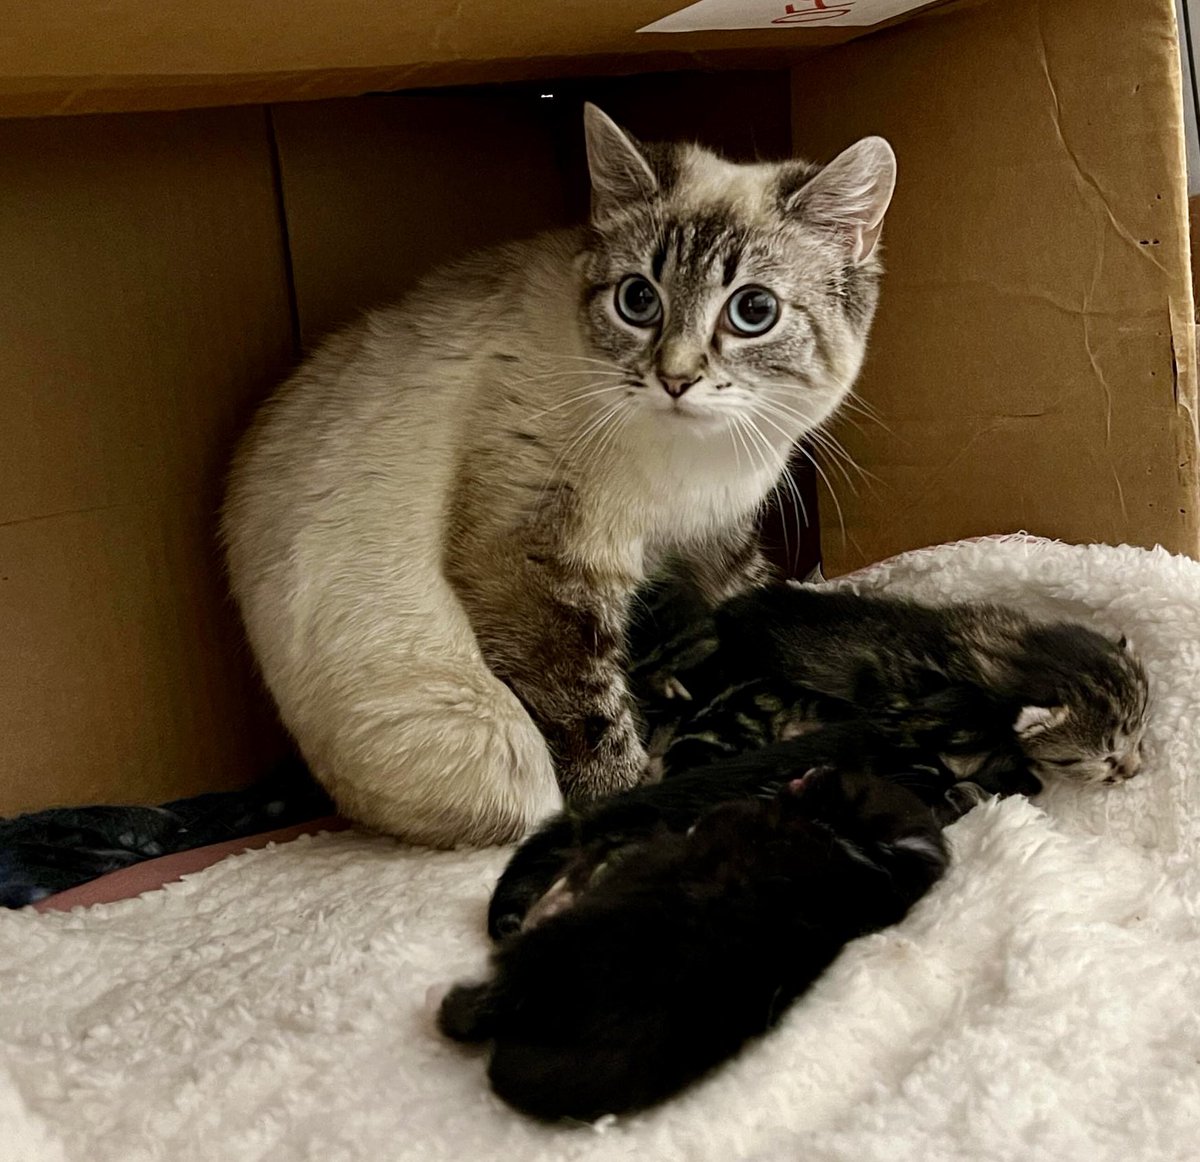 Good morning ☀️! 
From their amazing foster (You can see videos etc on her IG: itsybitsyhq 
“Momma and babies are doing well. Momma is still quite scared so I try not to stress her out with too many visits. I am just hoping she hangs in there for a few more weeks. She will be so